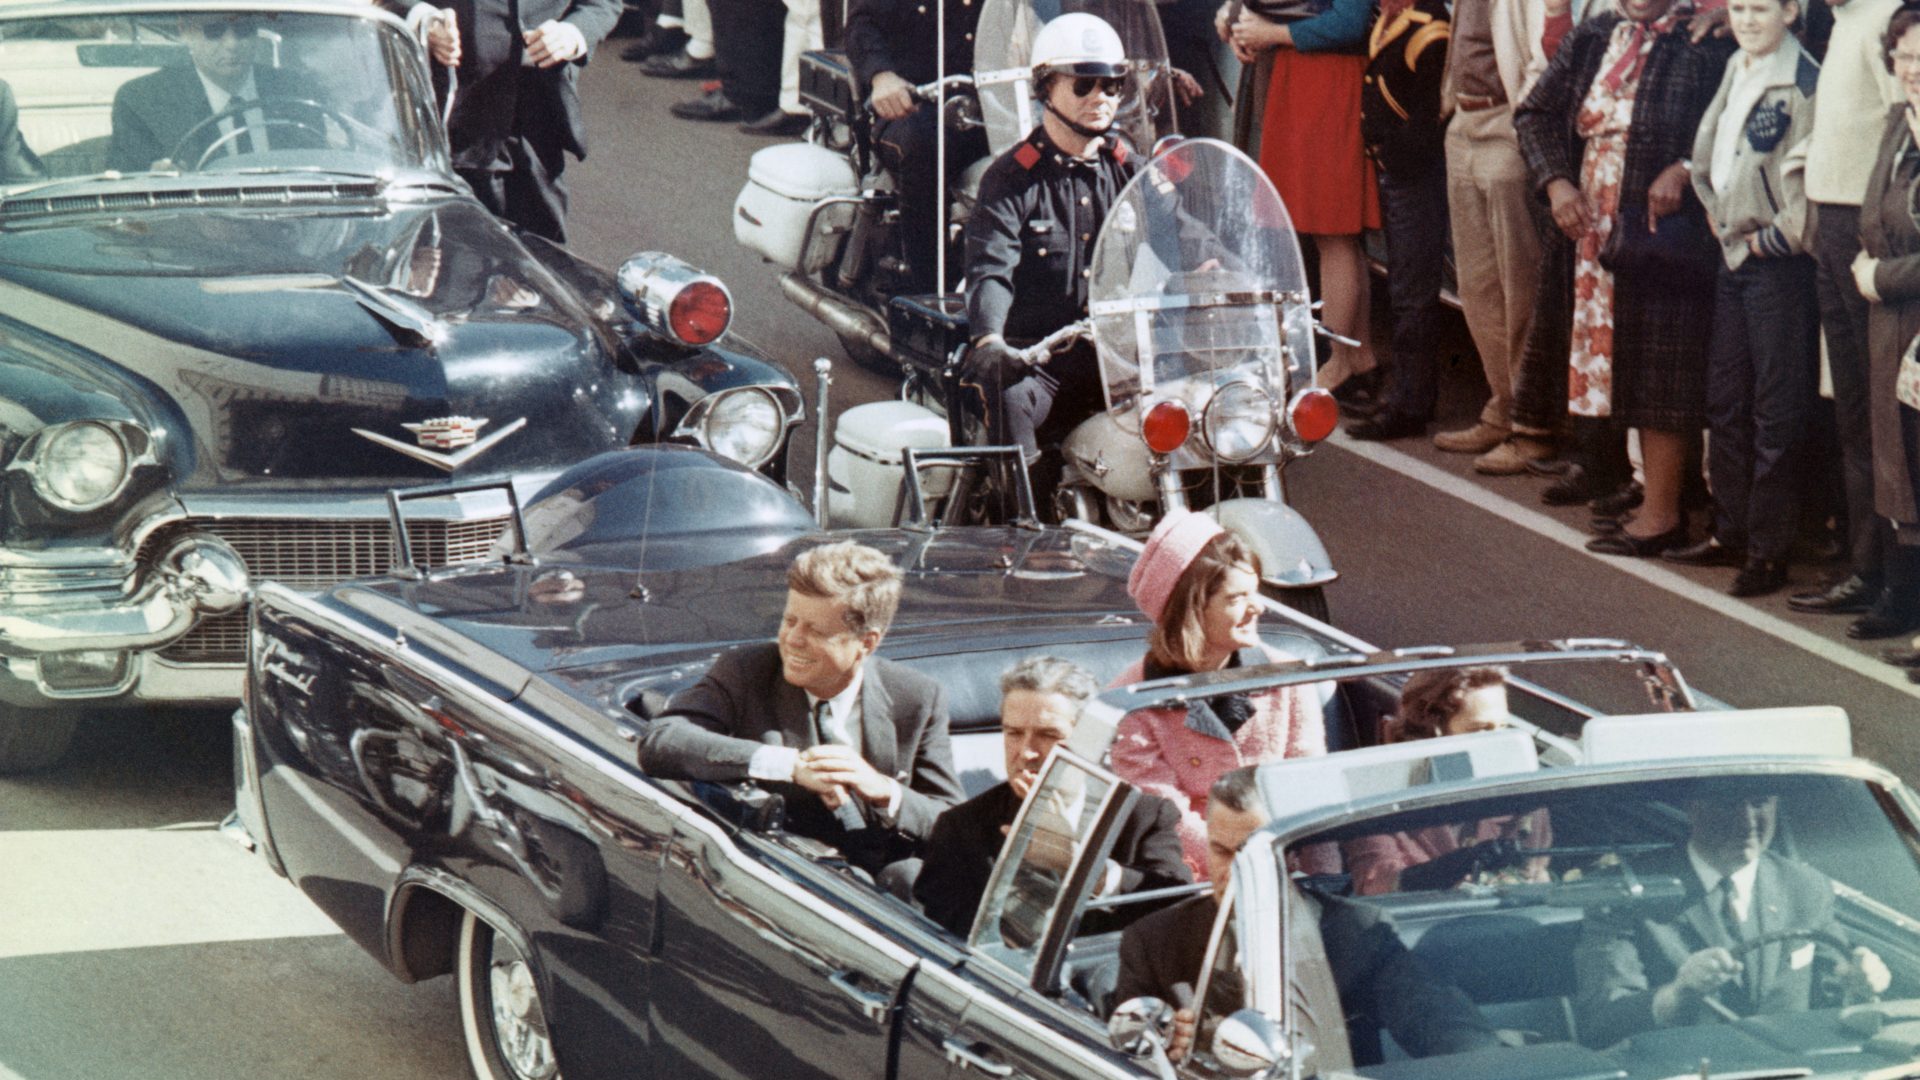 John F Kennedy, Jacqueline Kennedy and Texas governor John Connally smile at the crowds in Dallas on November 22, 1963. Minutes later the president was assassinated